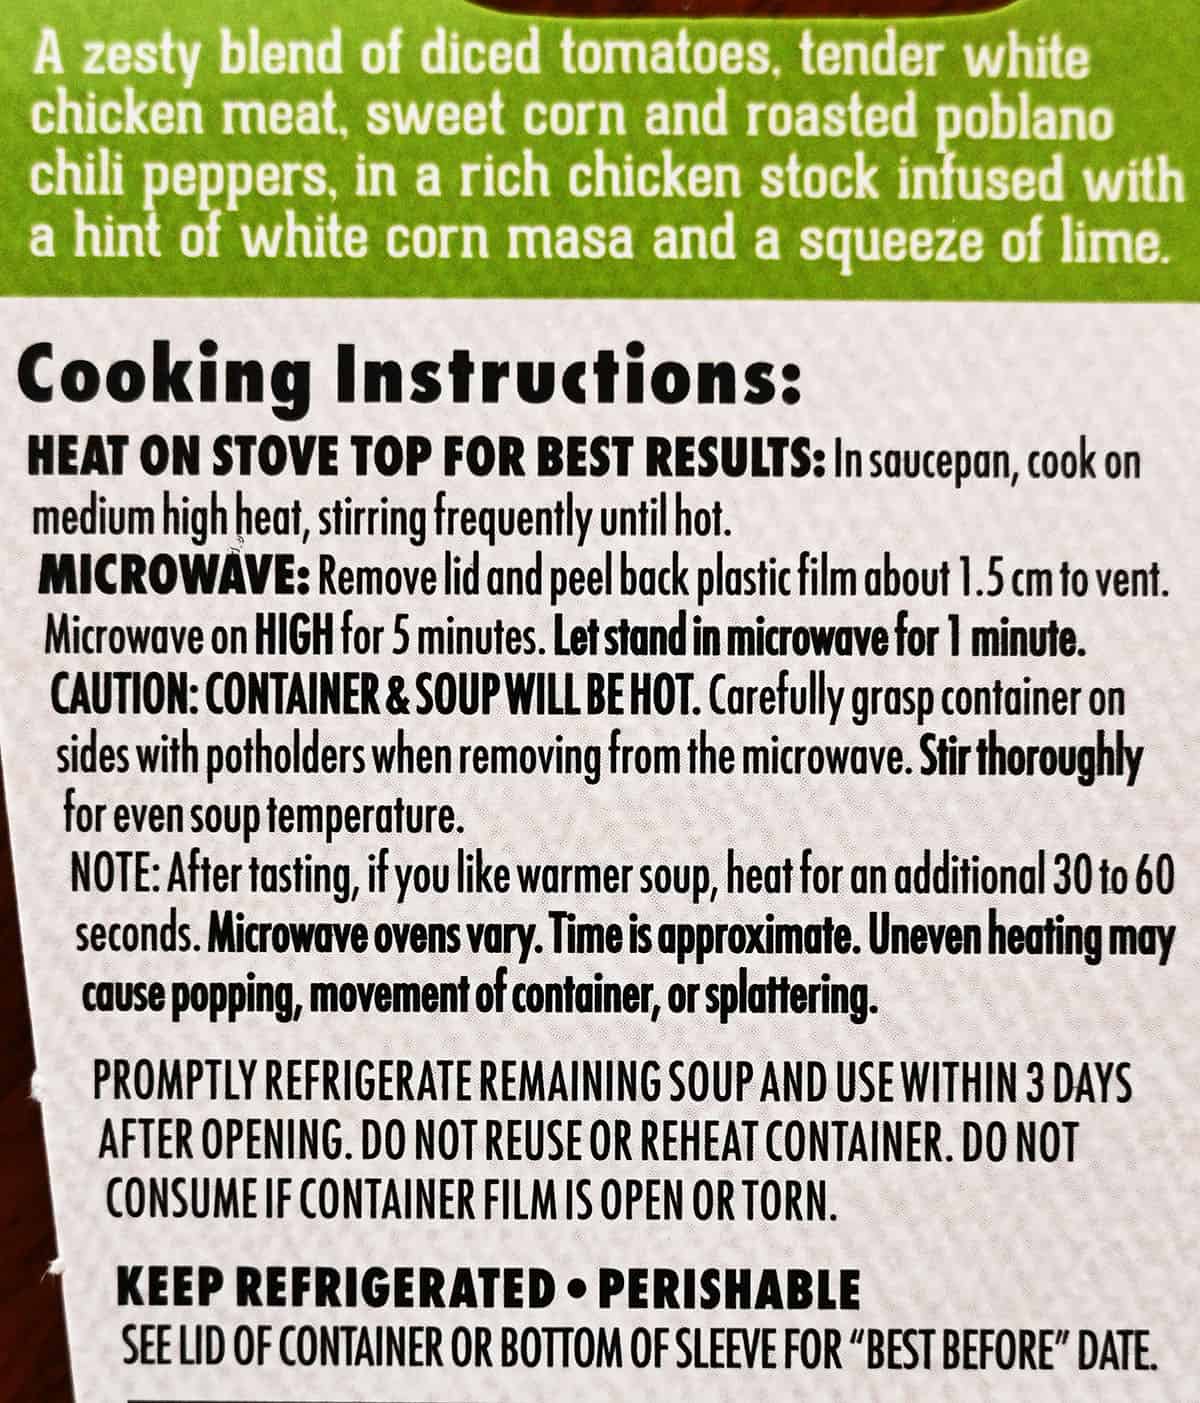 Image of the Costco Kirkland Signature Chicken Tortilla Soup cooking instructions.